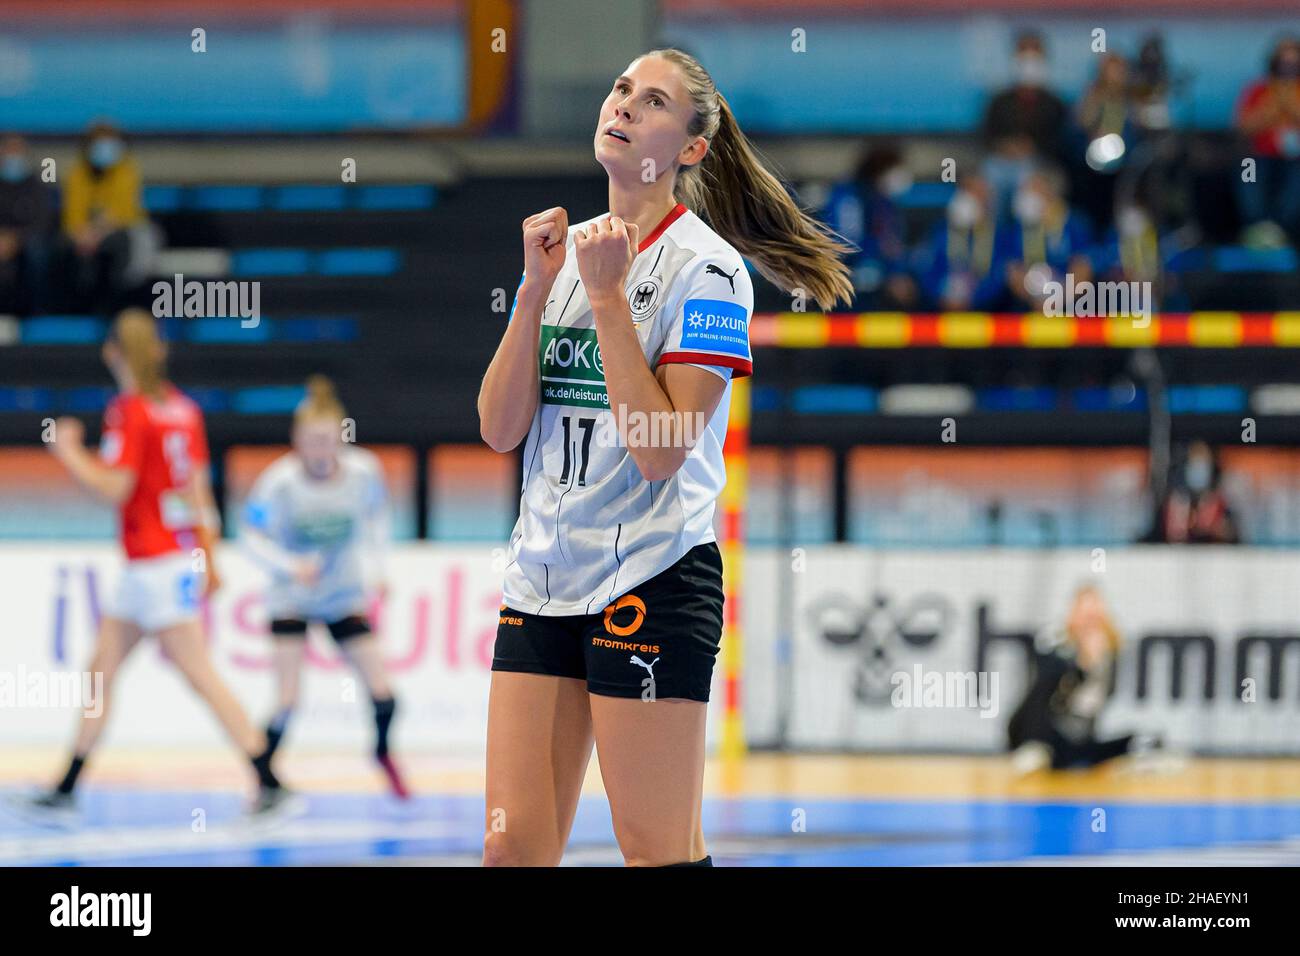 Granollers, Spain. 12th Dec, 2021. Handball, Women: World Cup, Denmark - Germany, Main Round, Group 3, Matchday 3. Alicia Stolle (Germany/Ferencvaros Budapest) reacts. Credit: Marco Wolf/wolf-sportfoto/dpa/Alamy Live News Stock Photo